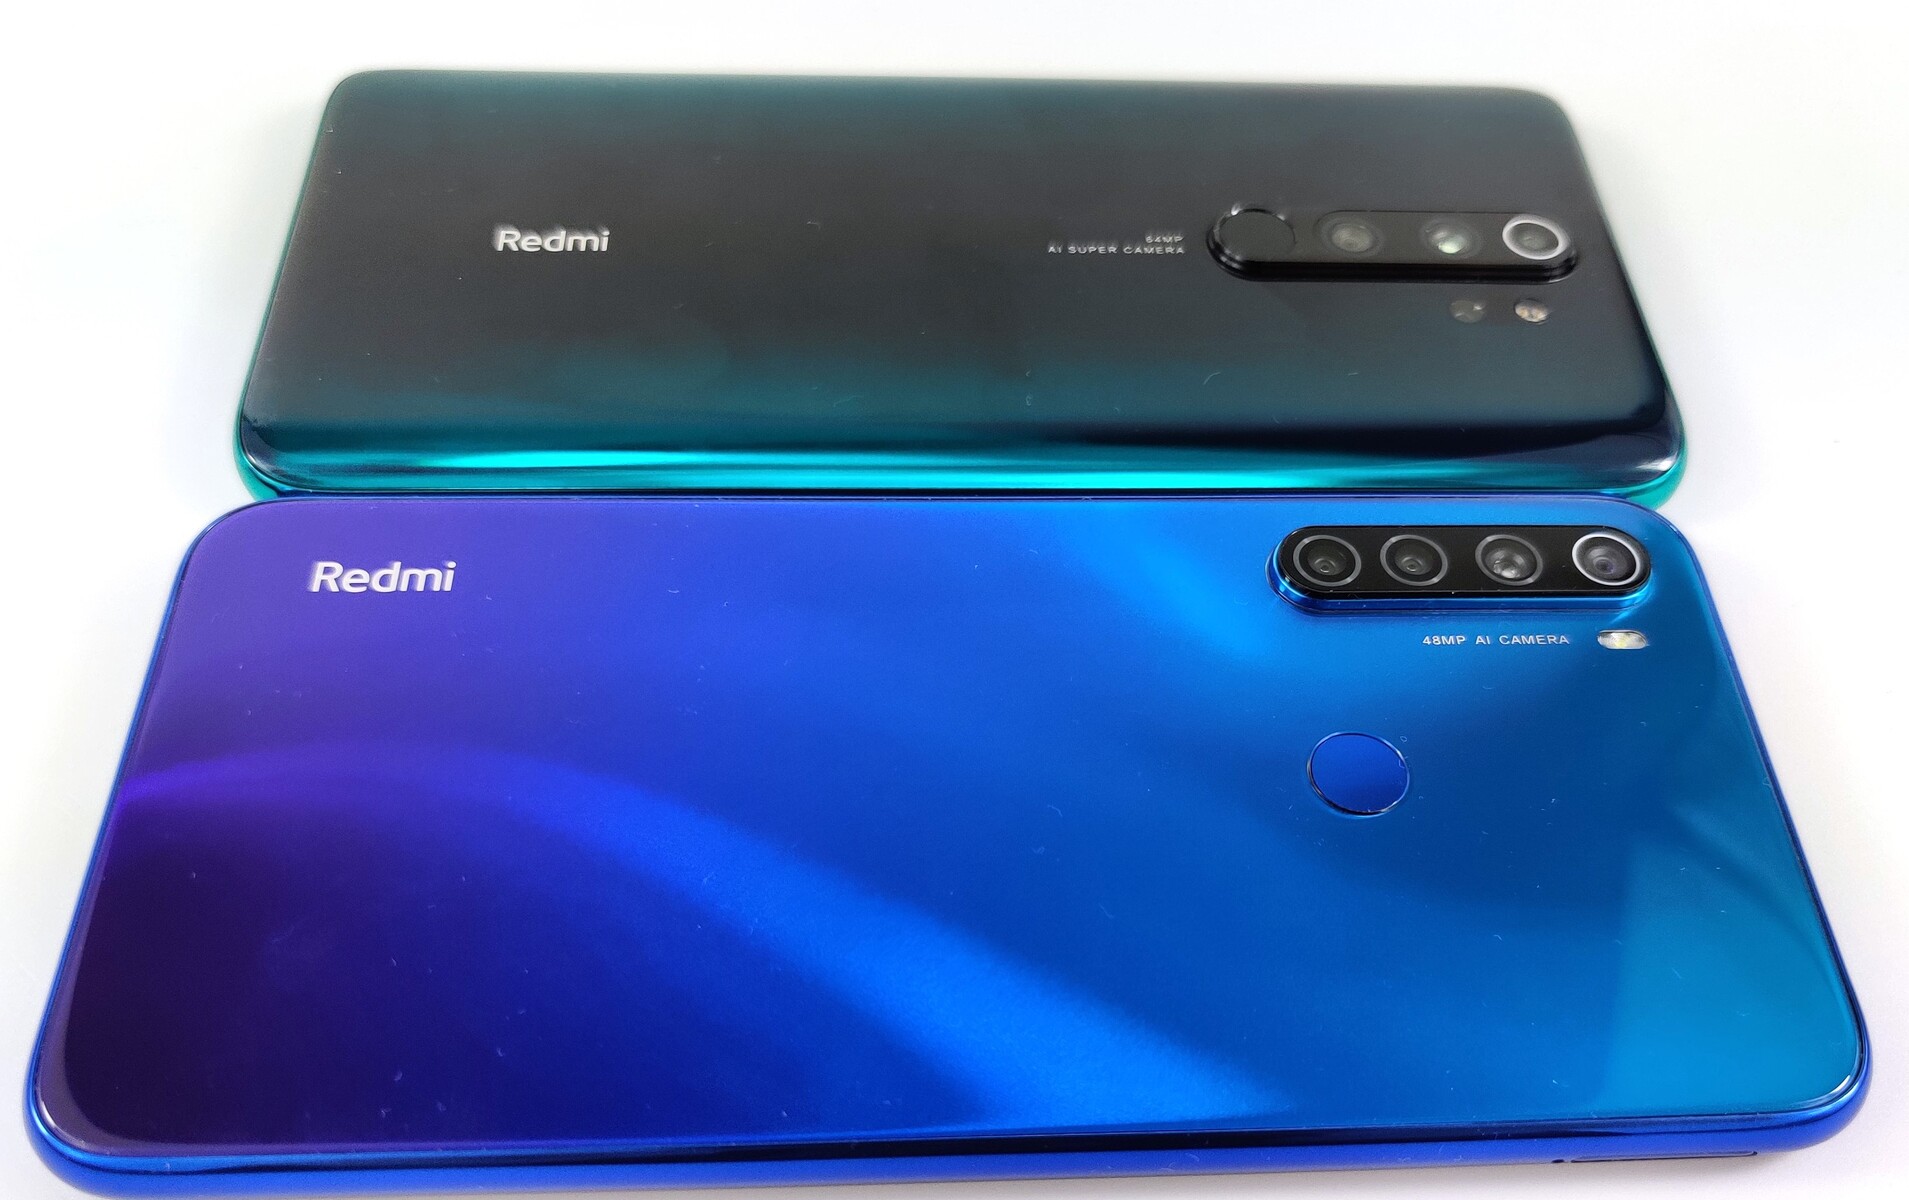 Redmi Note 8 Smartphone Camera Review: With the Pro, the Note 8